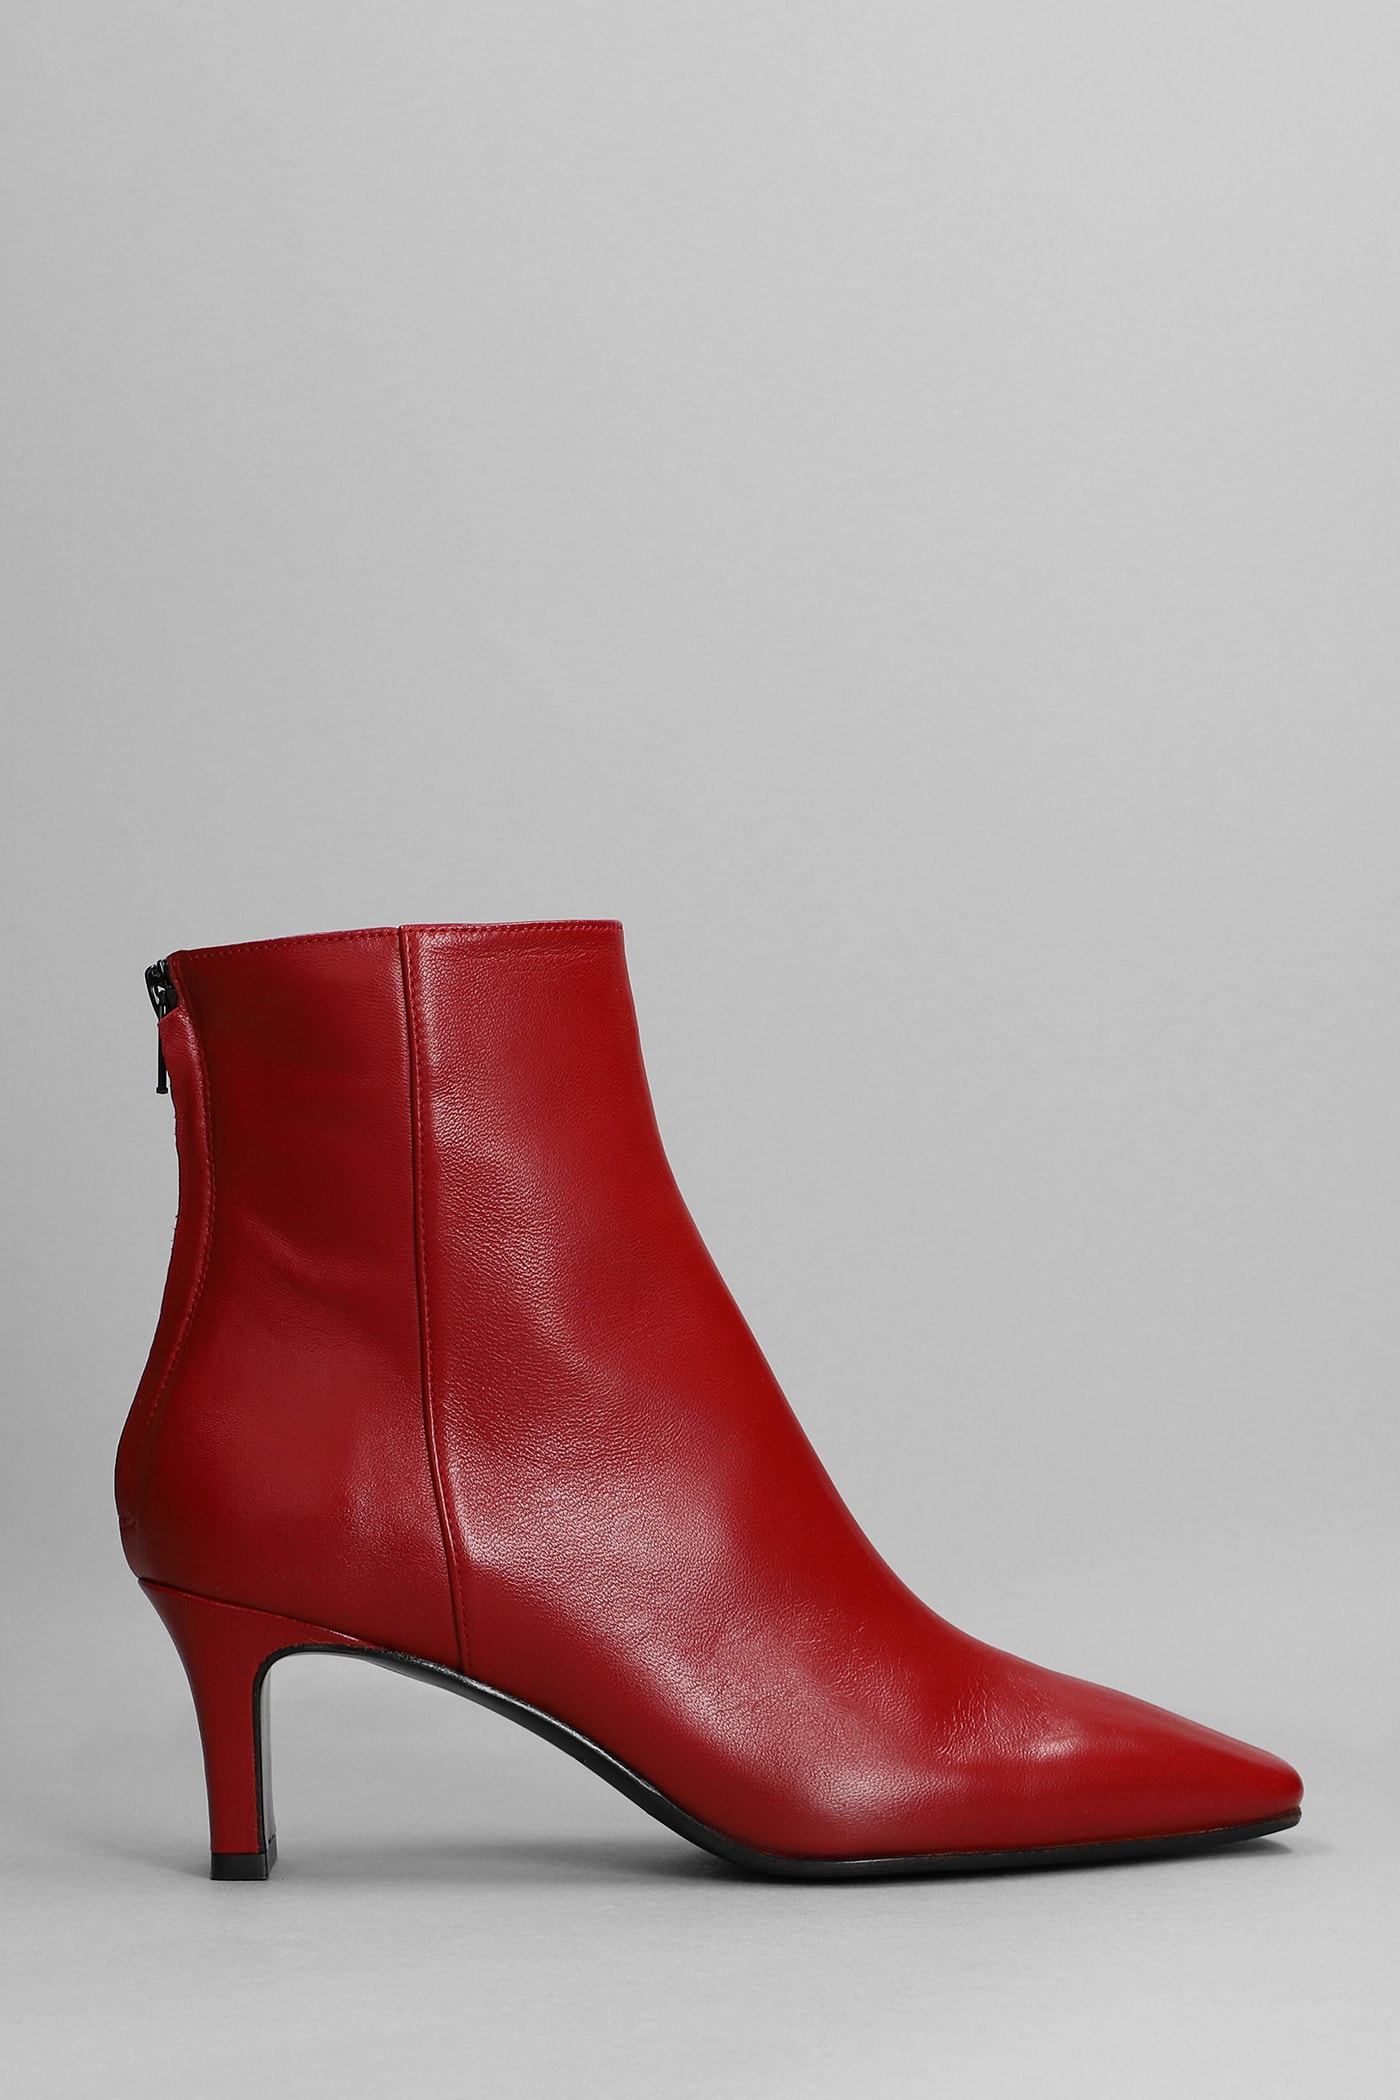 Fabio Rusconi High Heels Ankle Boots In Red Leather